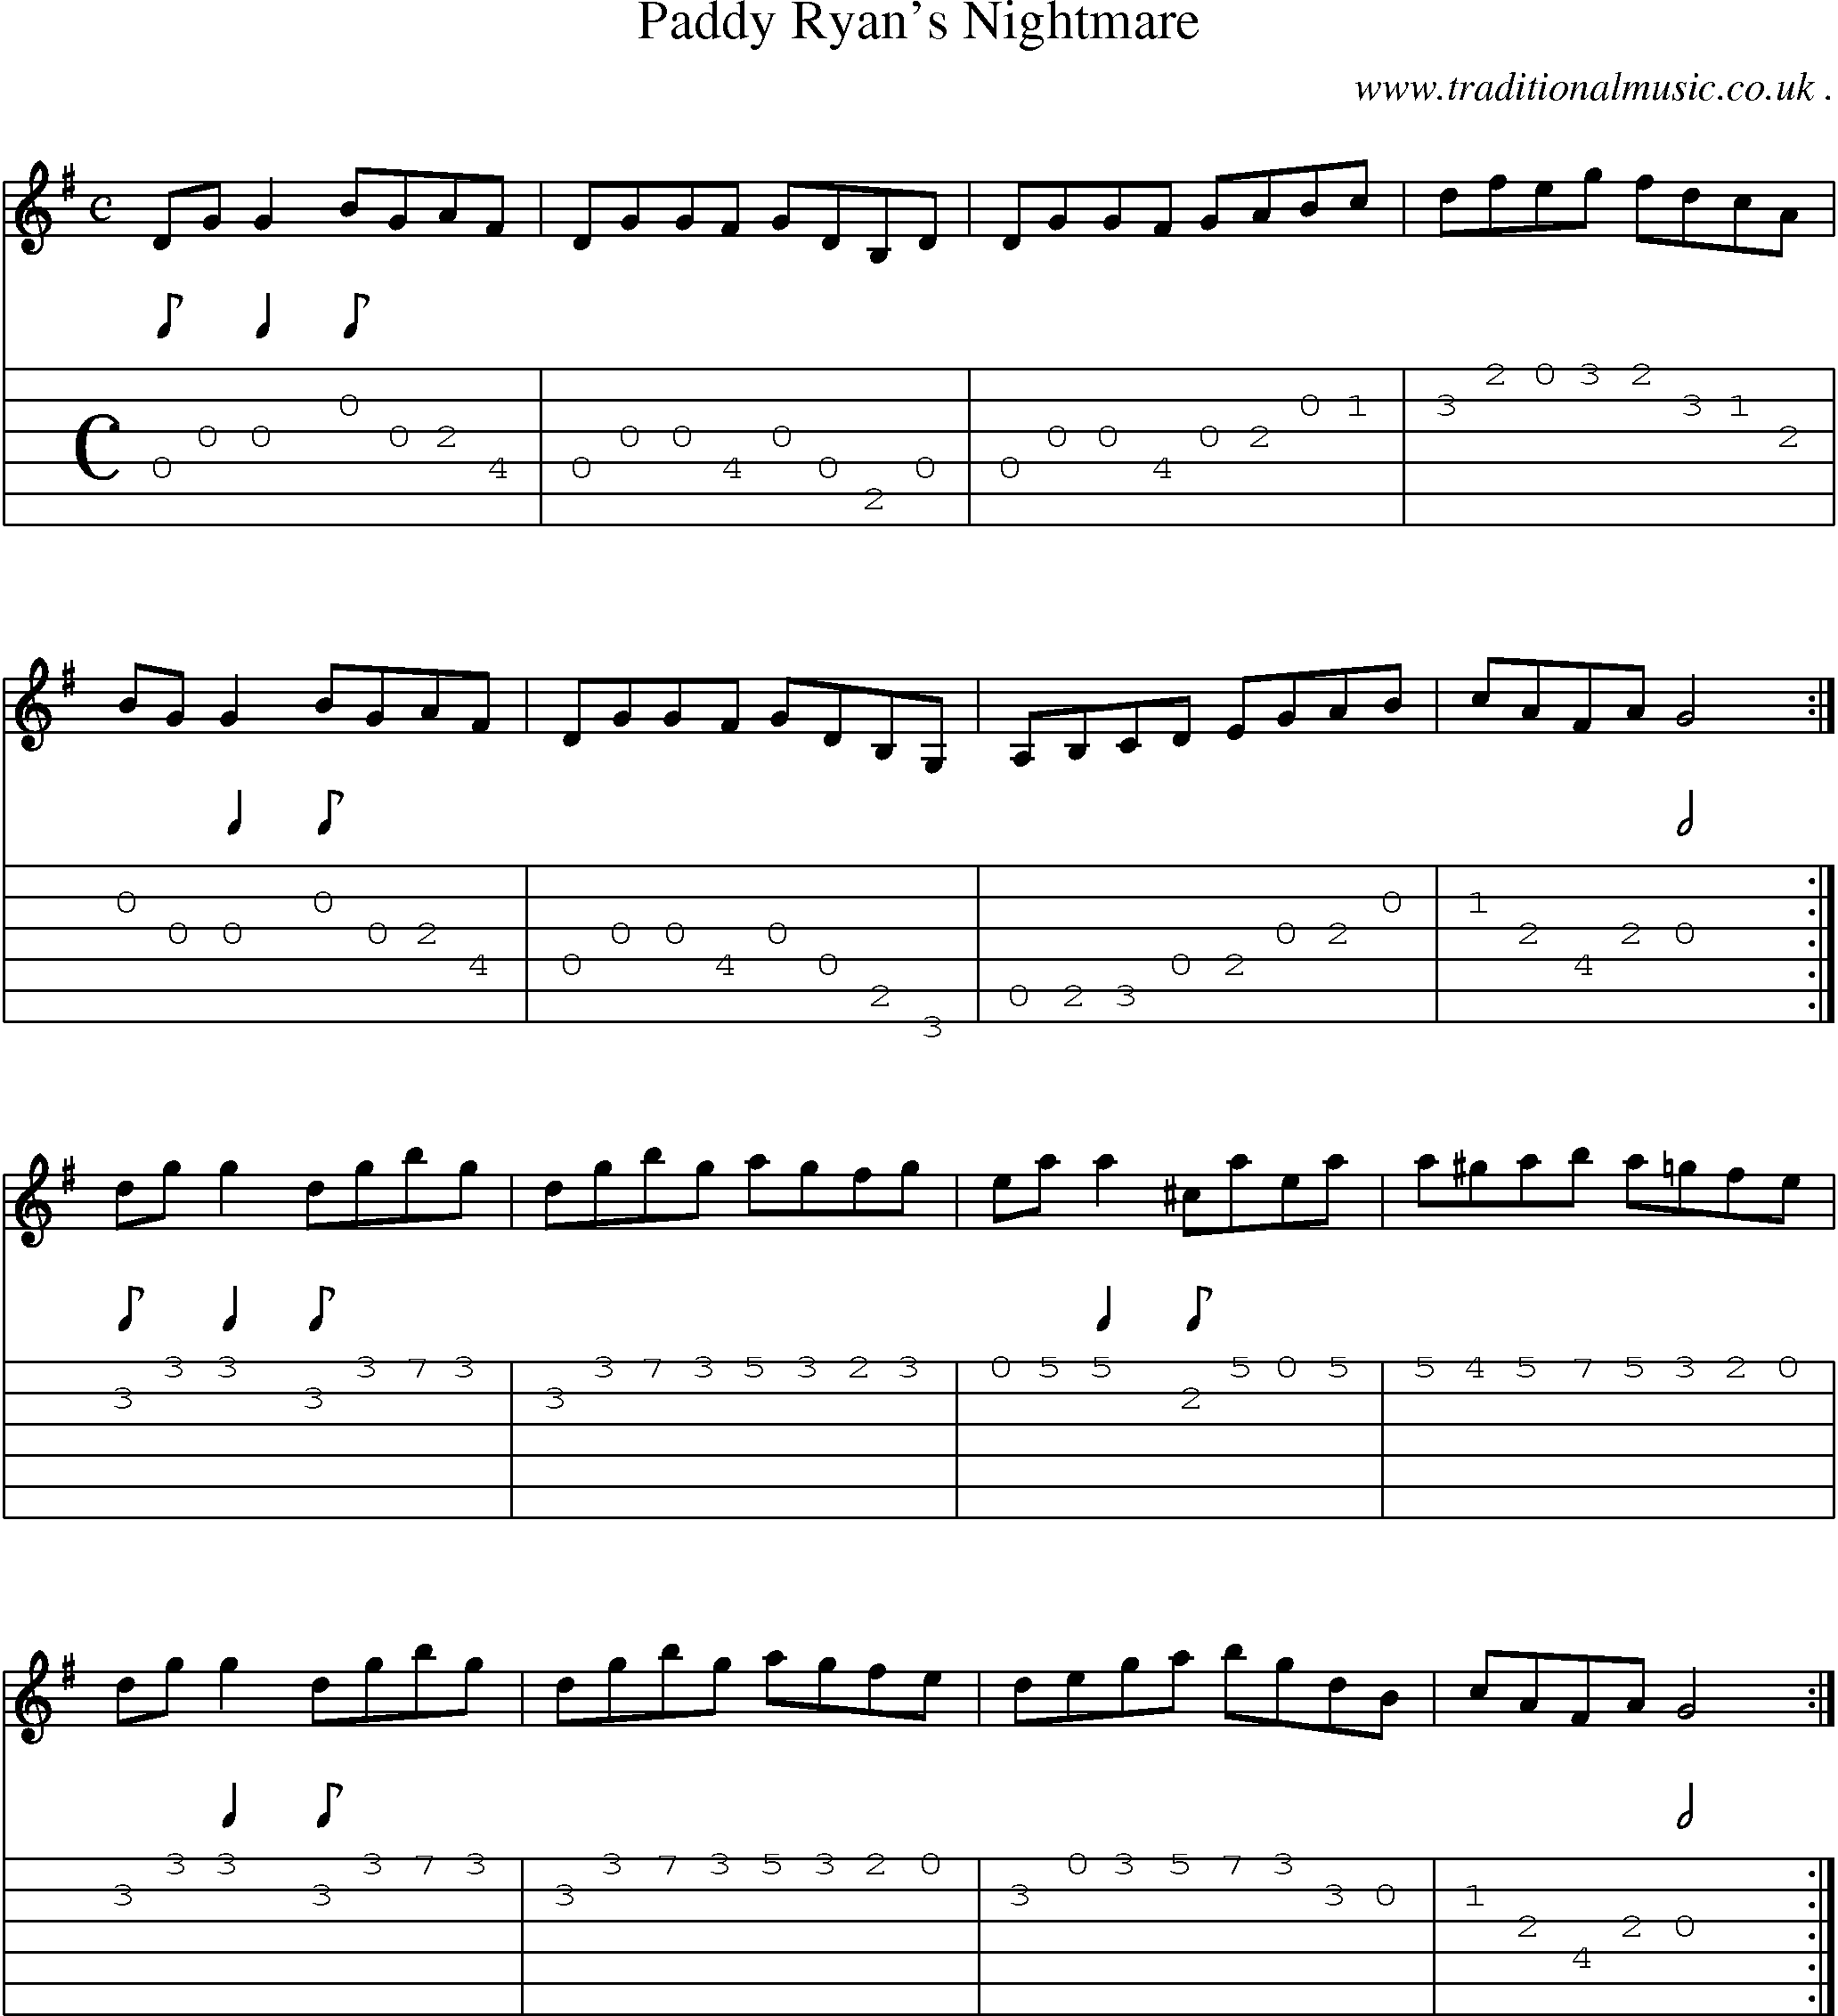 Sheet-Music and Guitar Tabs for Paddy Ryans Nightmare